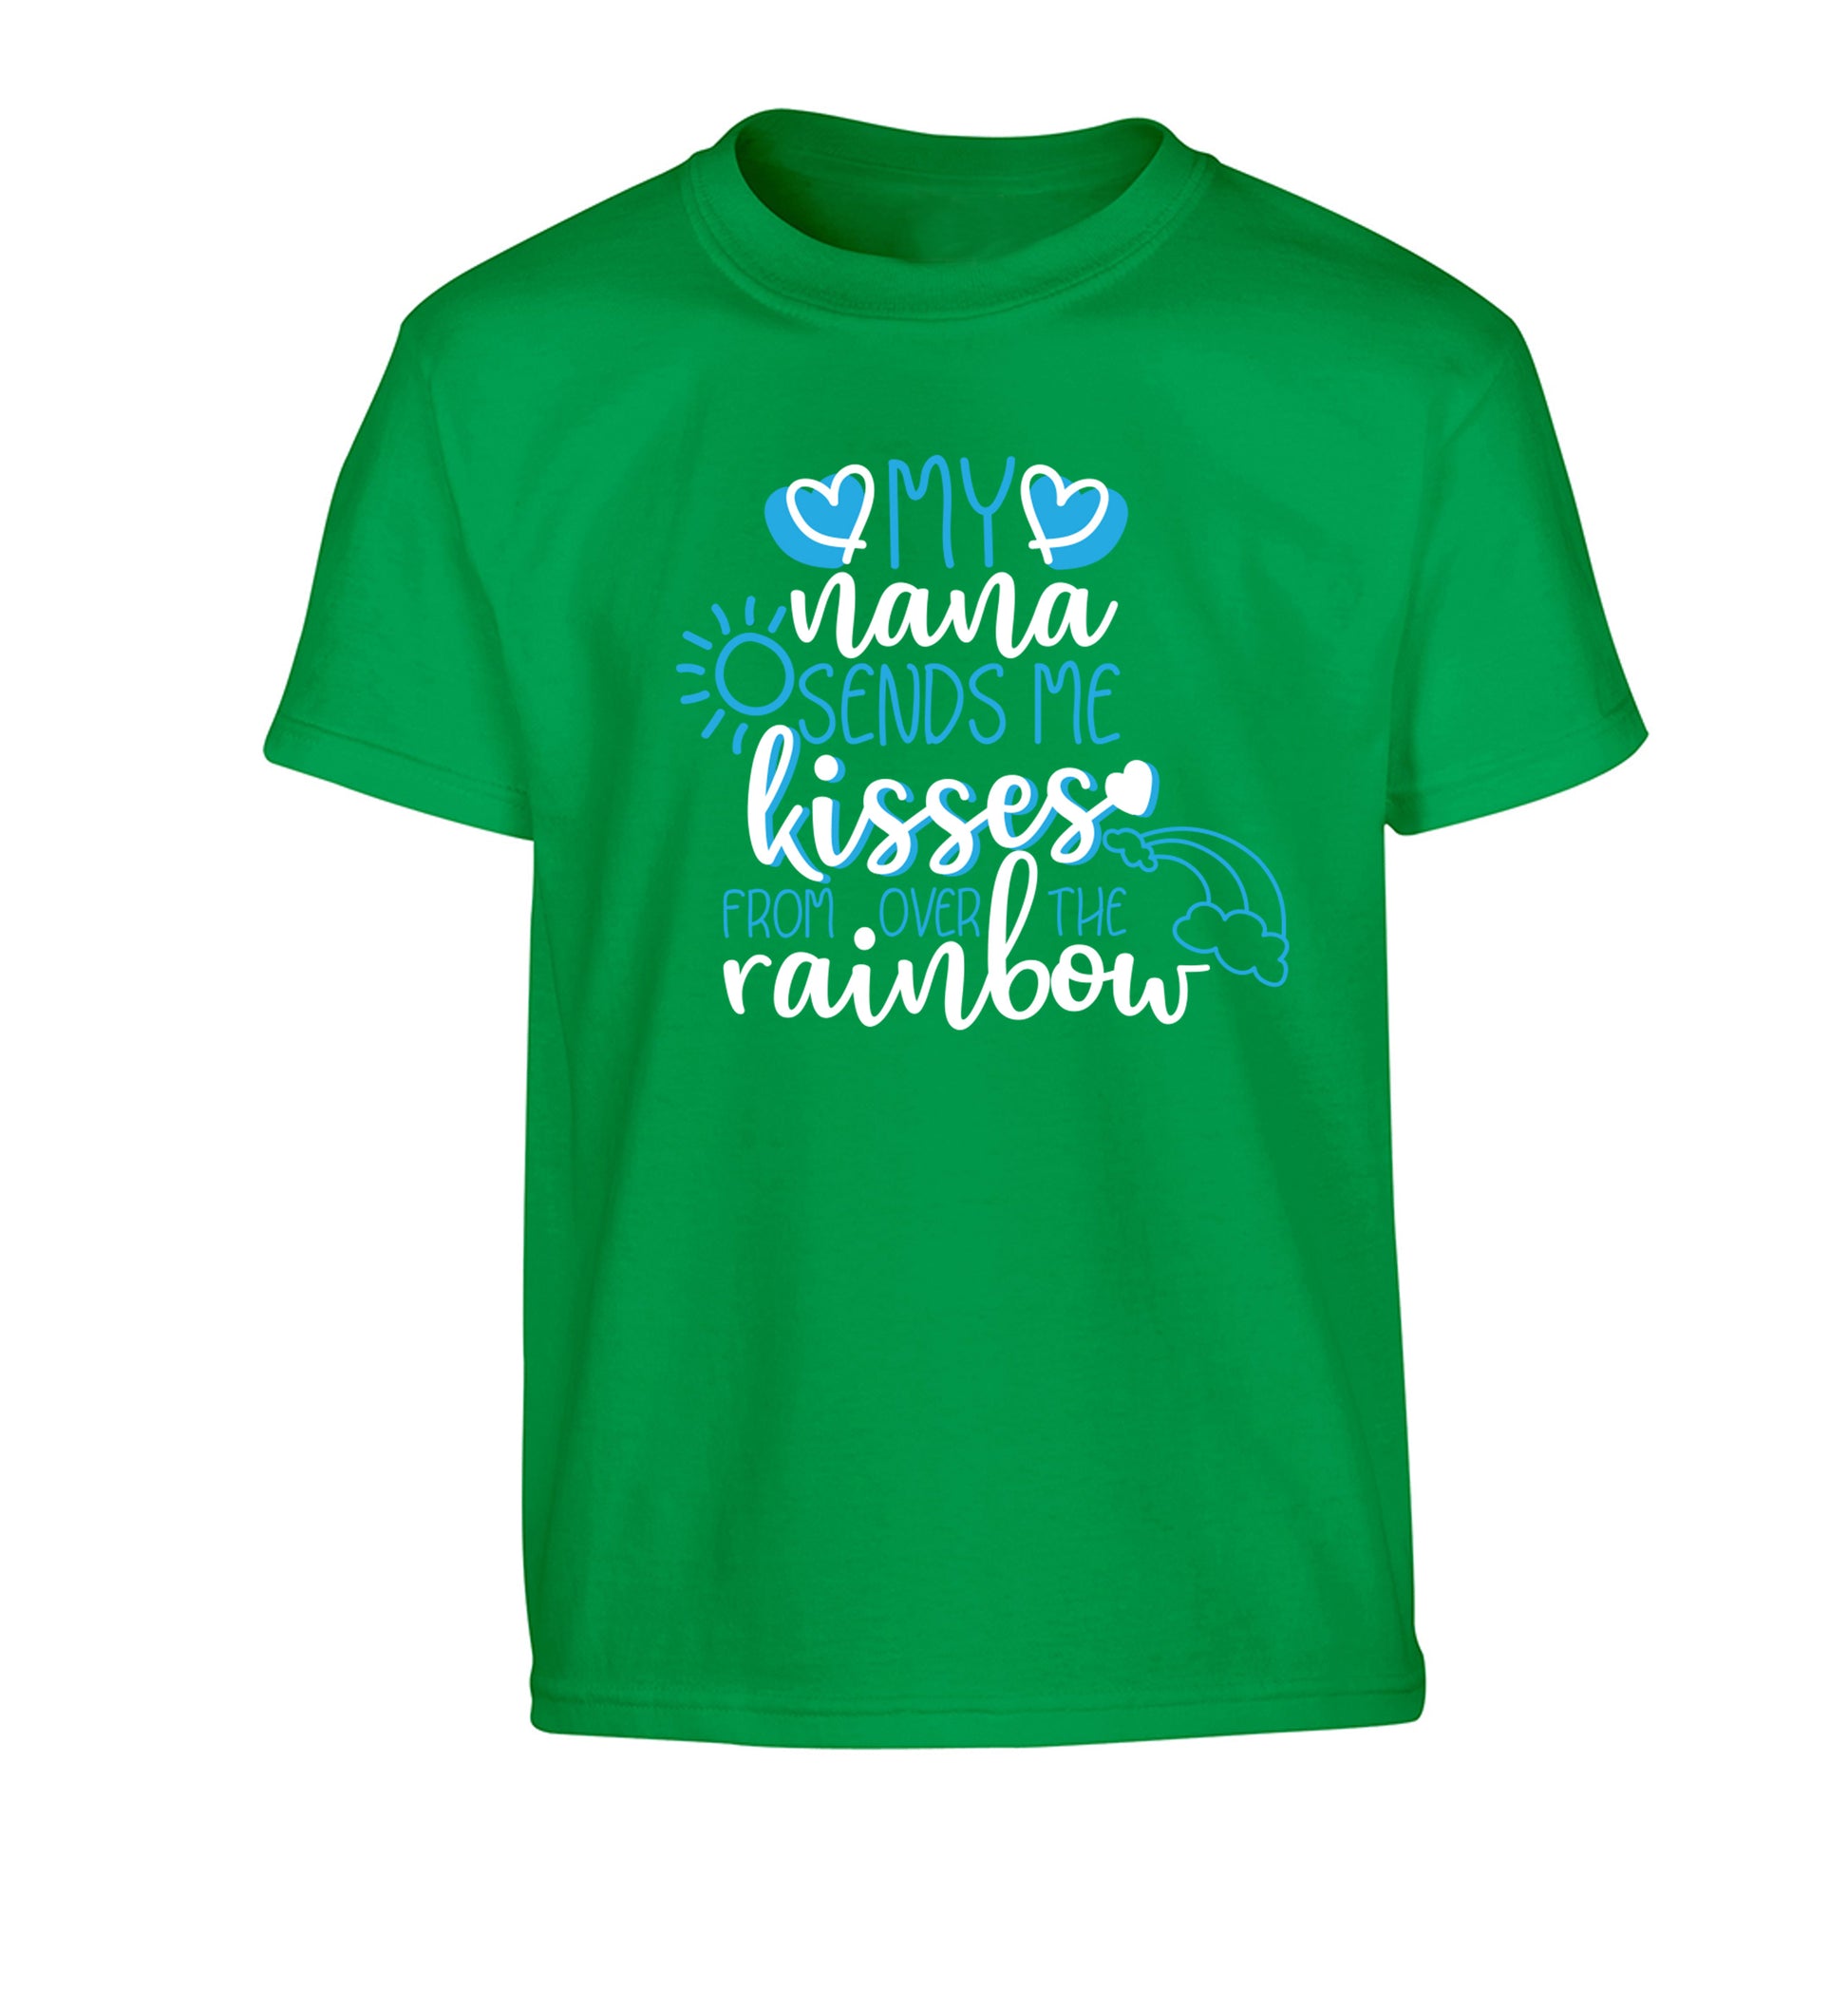 My nana sends me kisses from over the rainbow Children's green Tshirt 12-13 Years